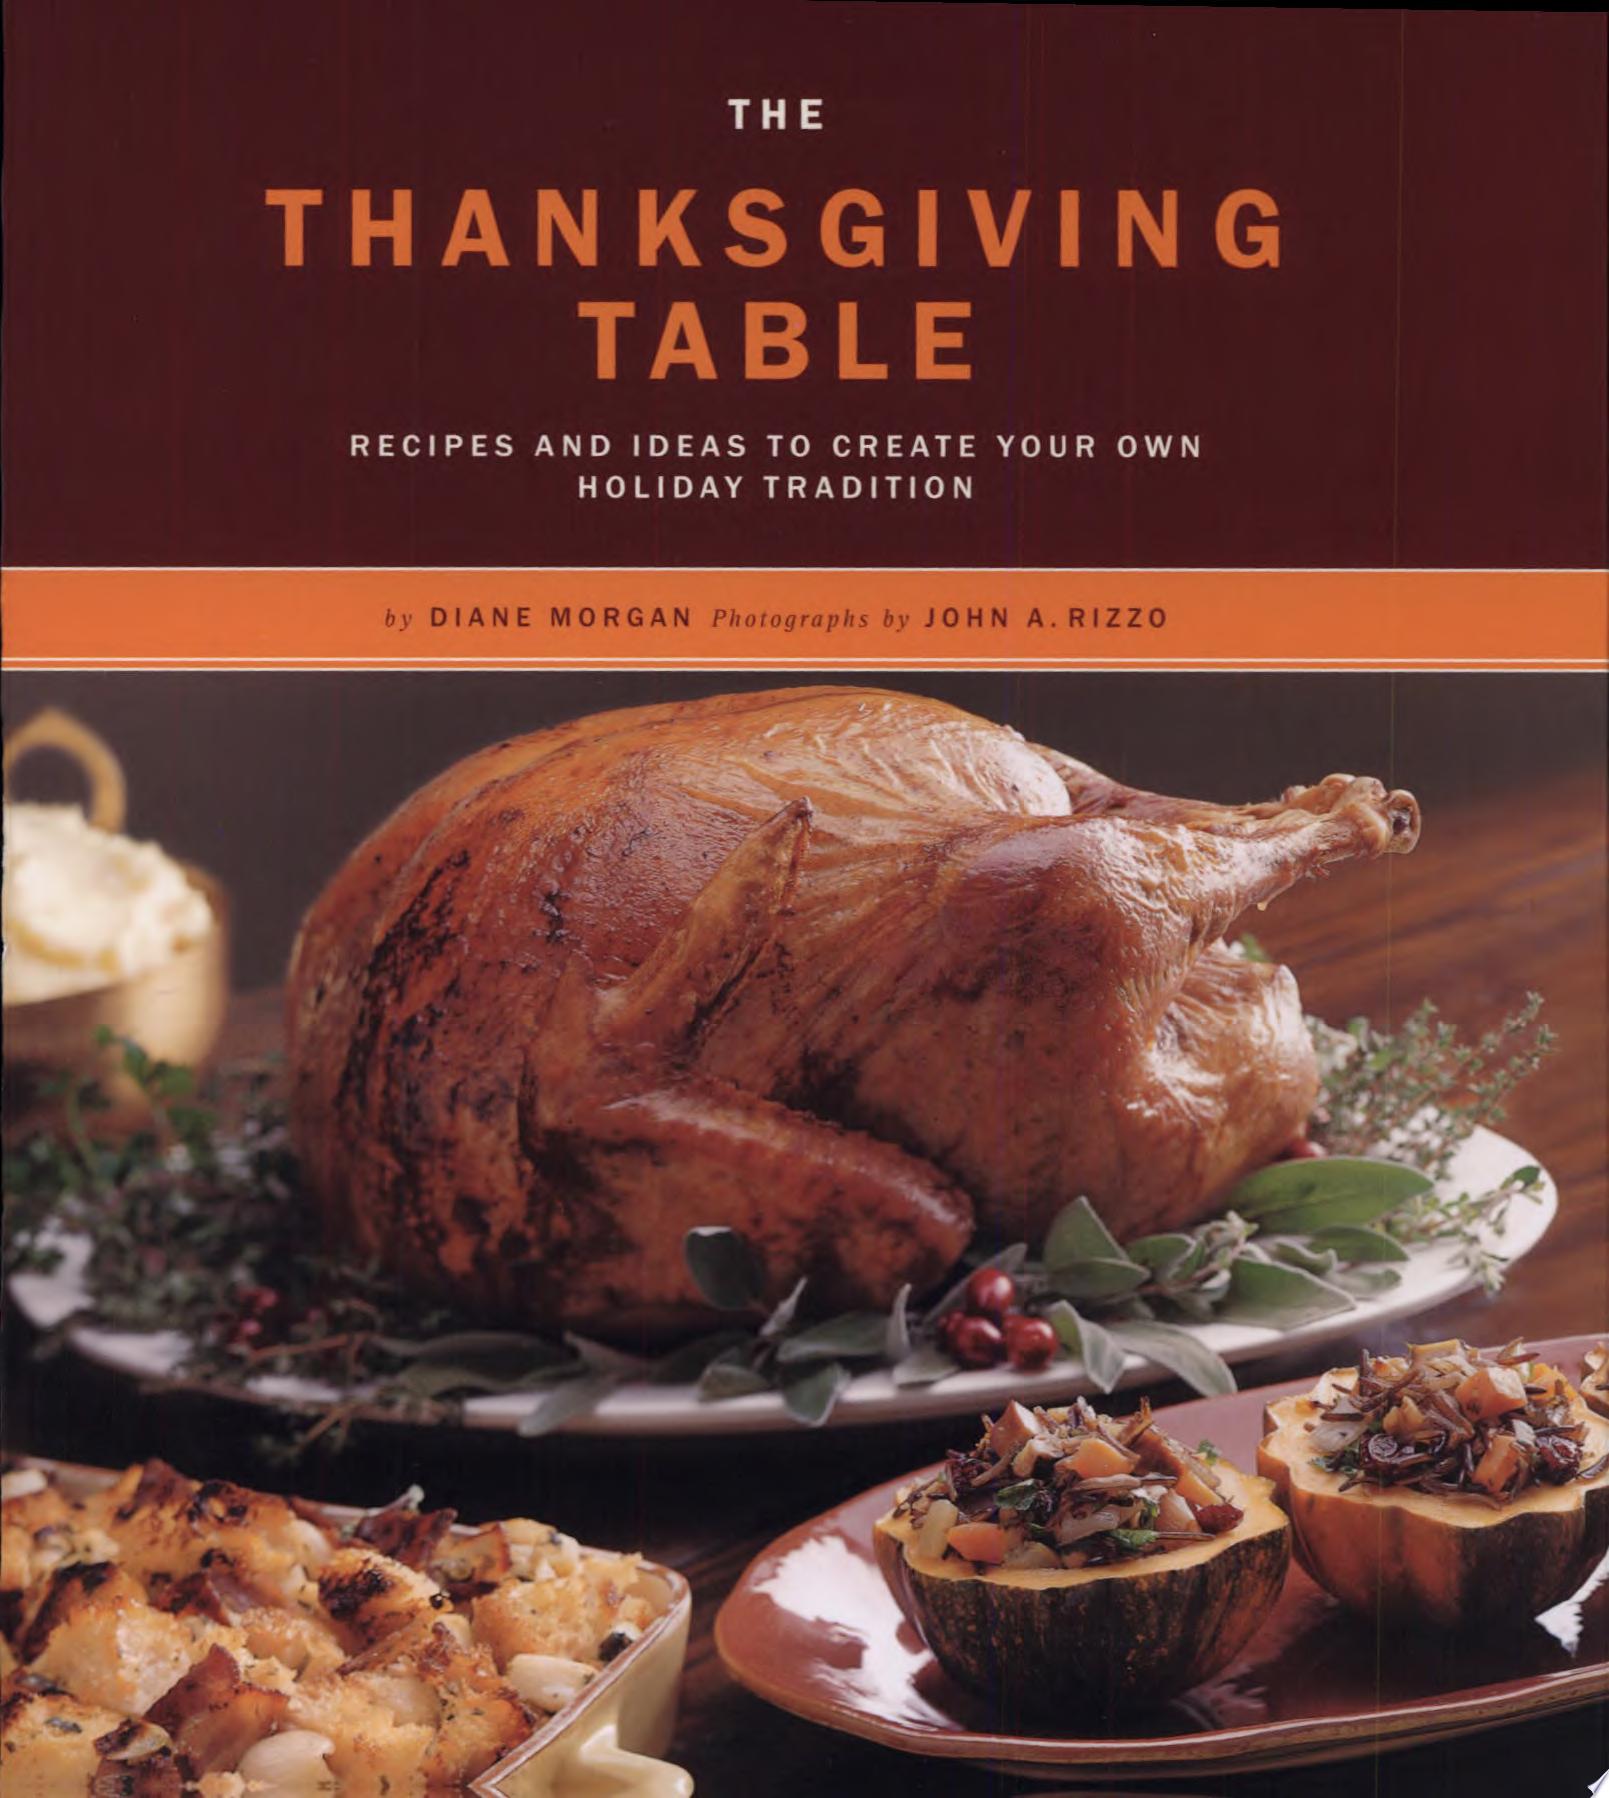 Image for "The Thanksgiving Table"